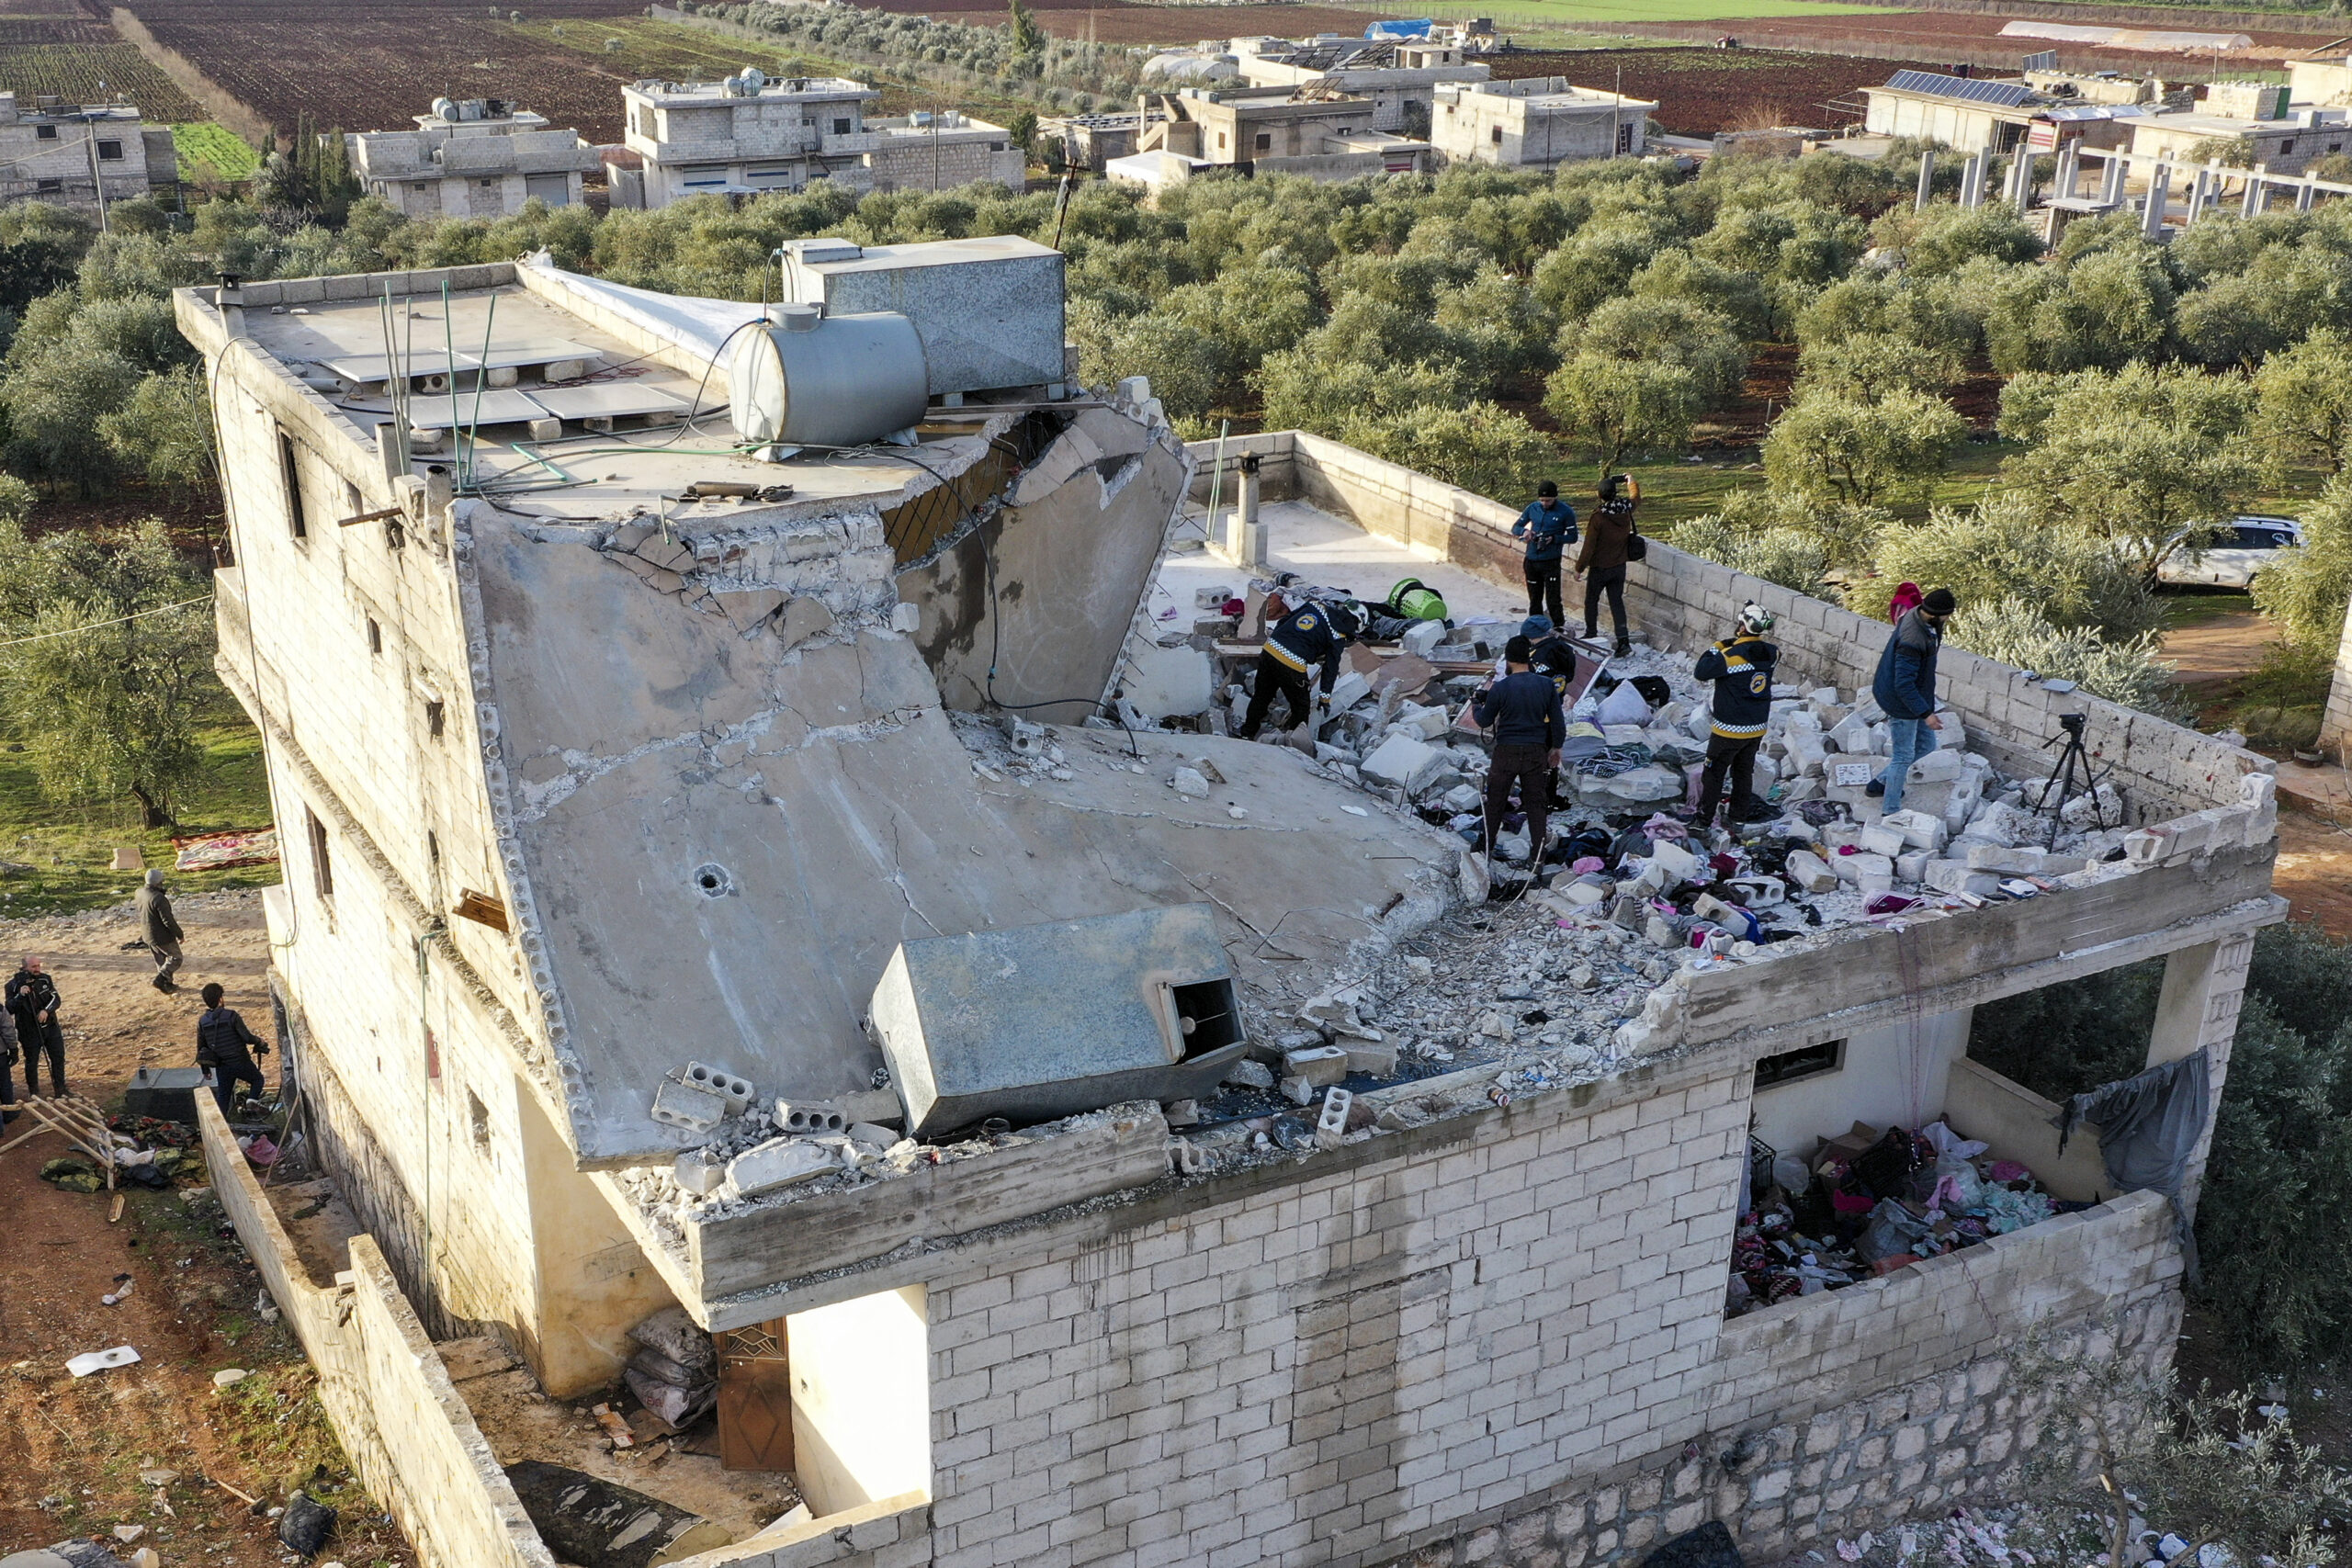 People inspect a destroyed house following an operation by the U.S. military in the Syrian village of Atmeh, in Idlib province, Syria, Thursday, Feb. 3, 2022. U.S. special operations forces conducted a large-scale counterterrorism raid in northwestern Syria overnight Thursday, in what the Pentagon said was a "successful mission." Residents and activists reported multiple deaths including civilians from the attack. (AP Photo/Ghaith Alsayed)